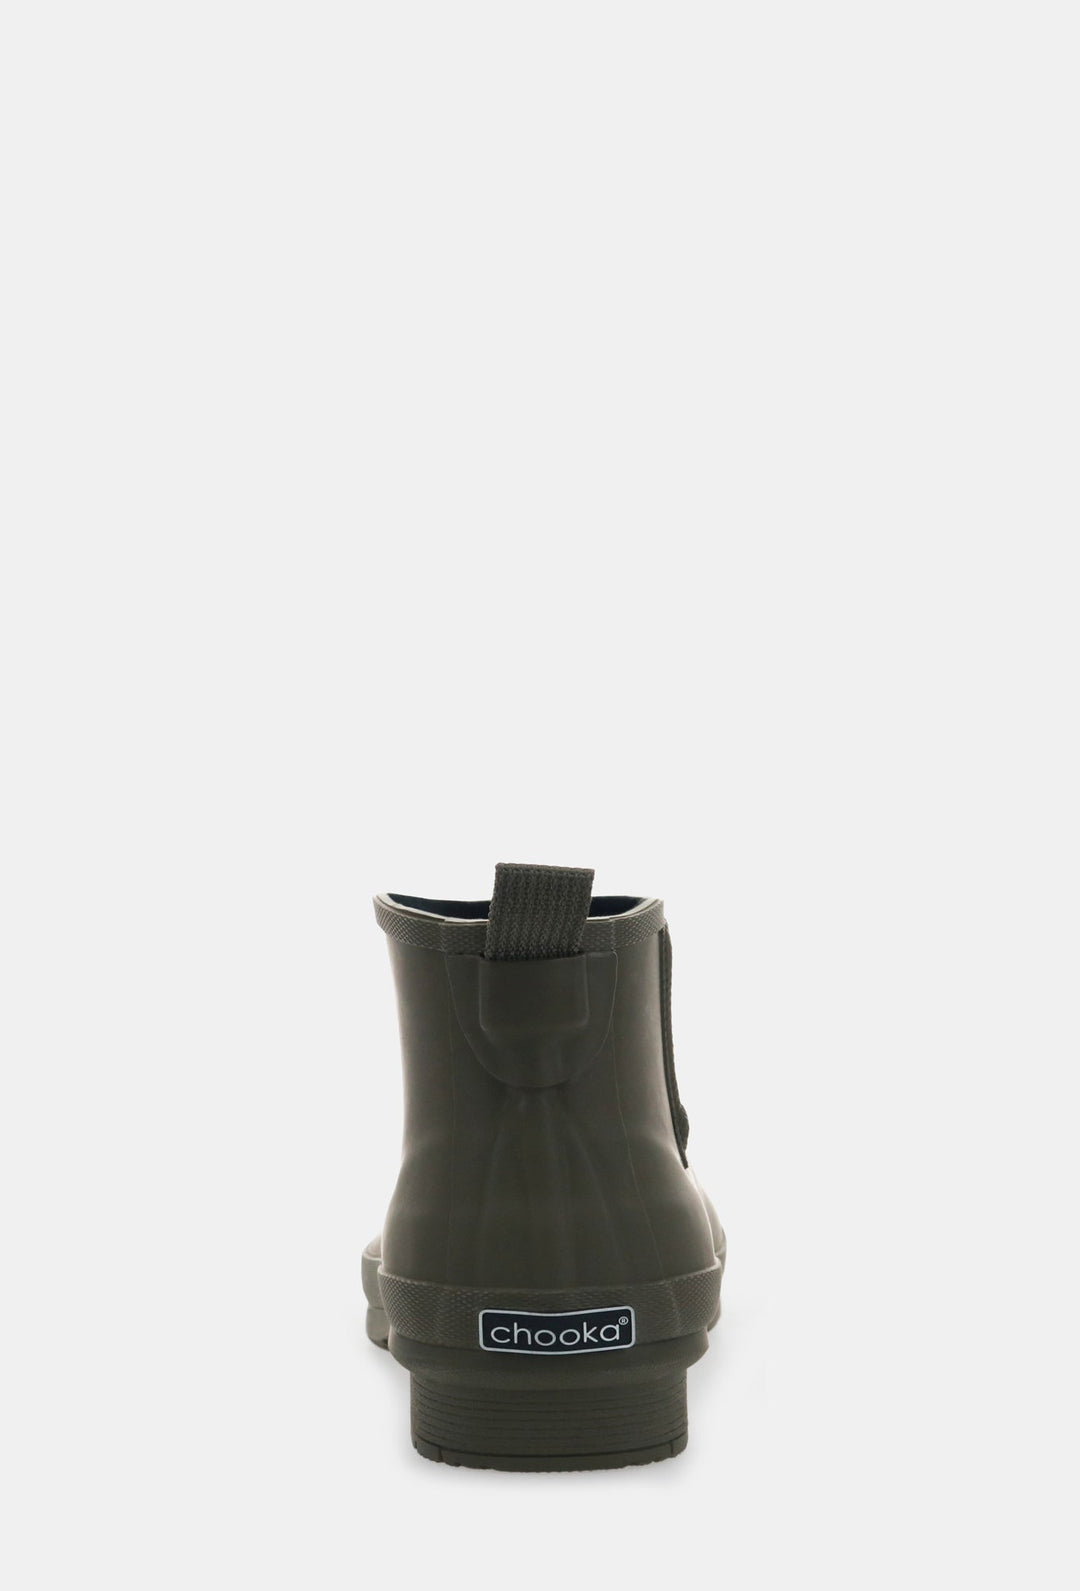 Classic Matte Ankle Rain Boot - Olive - Western Chief